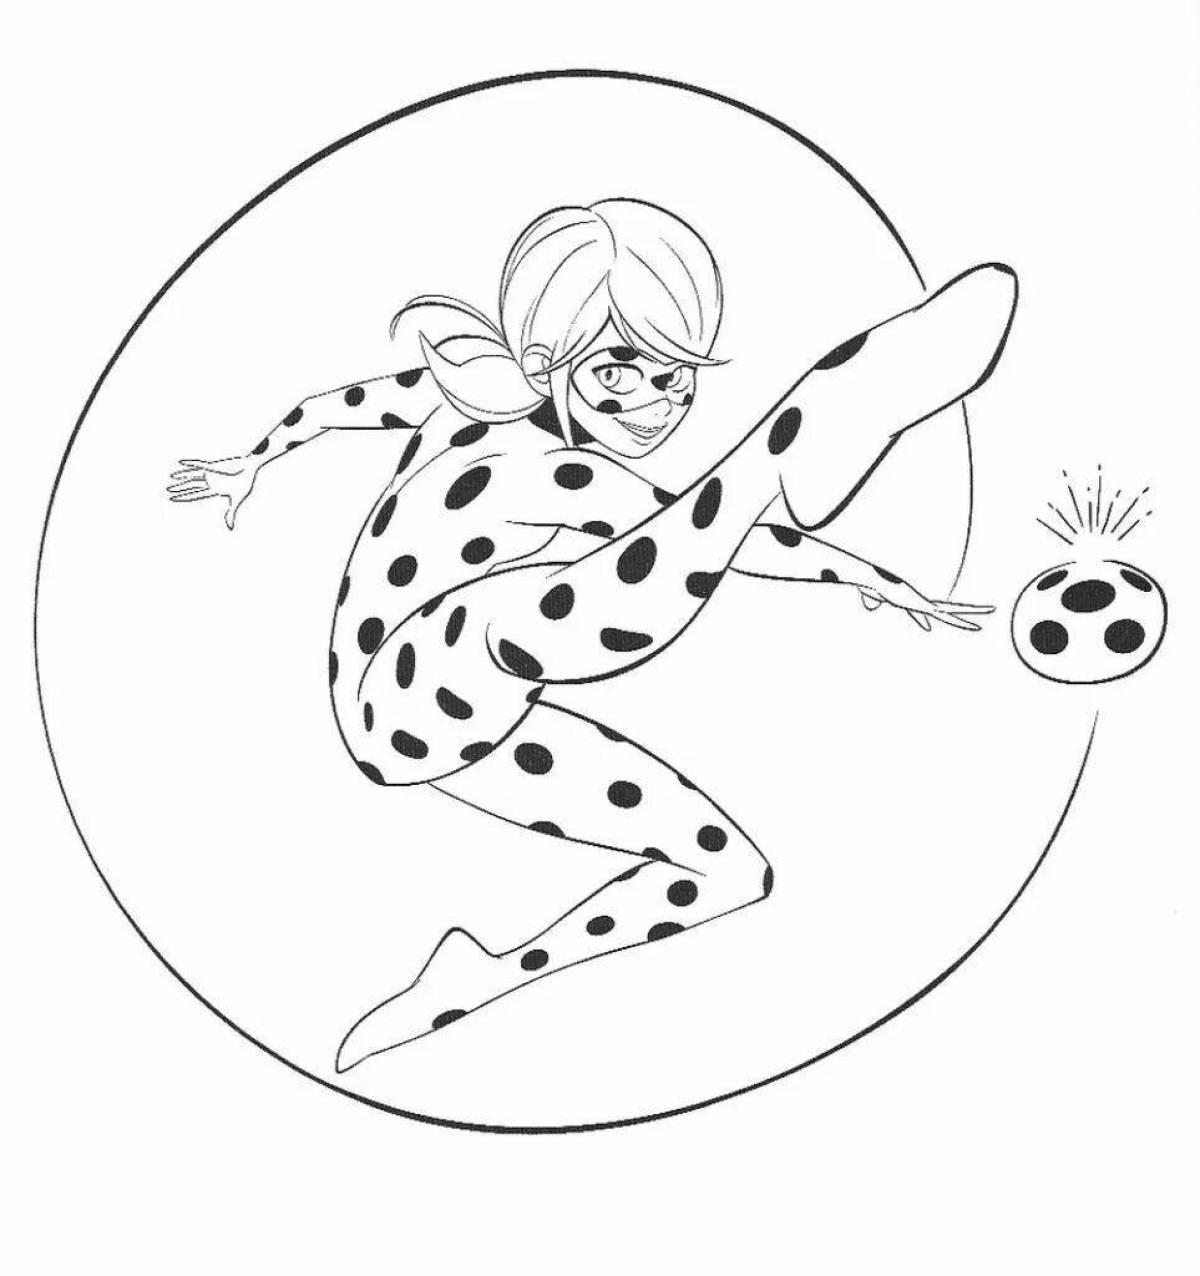 Coloring page with a playful ladybug earring